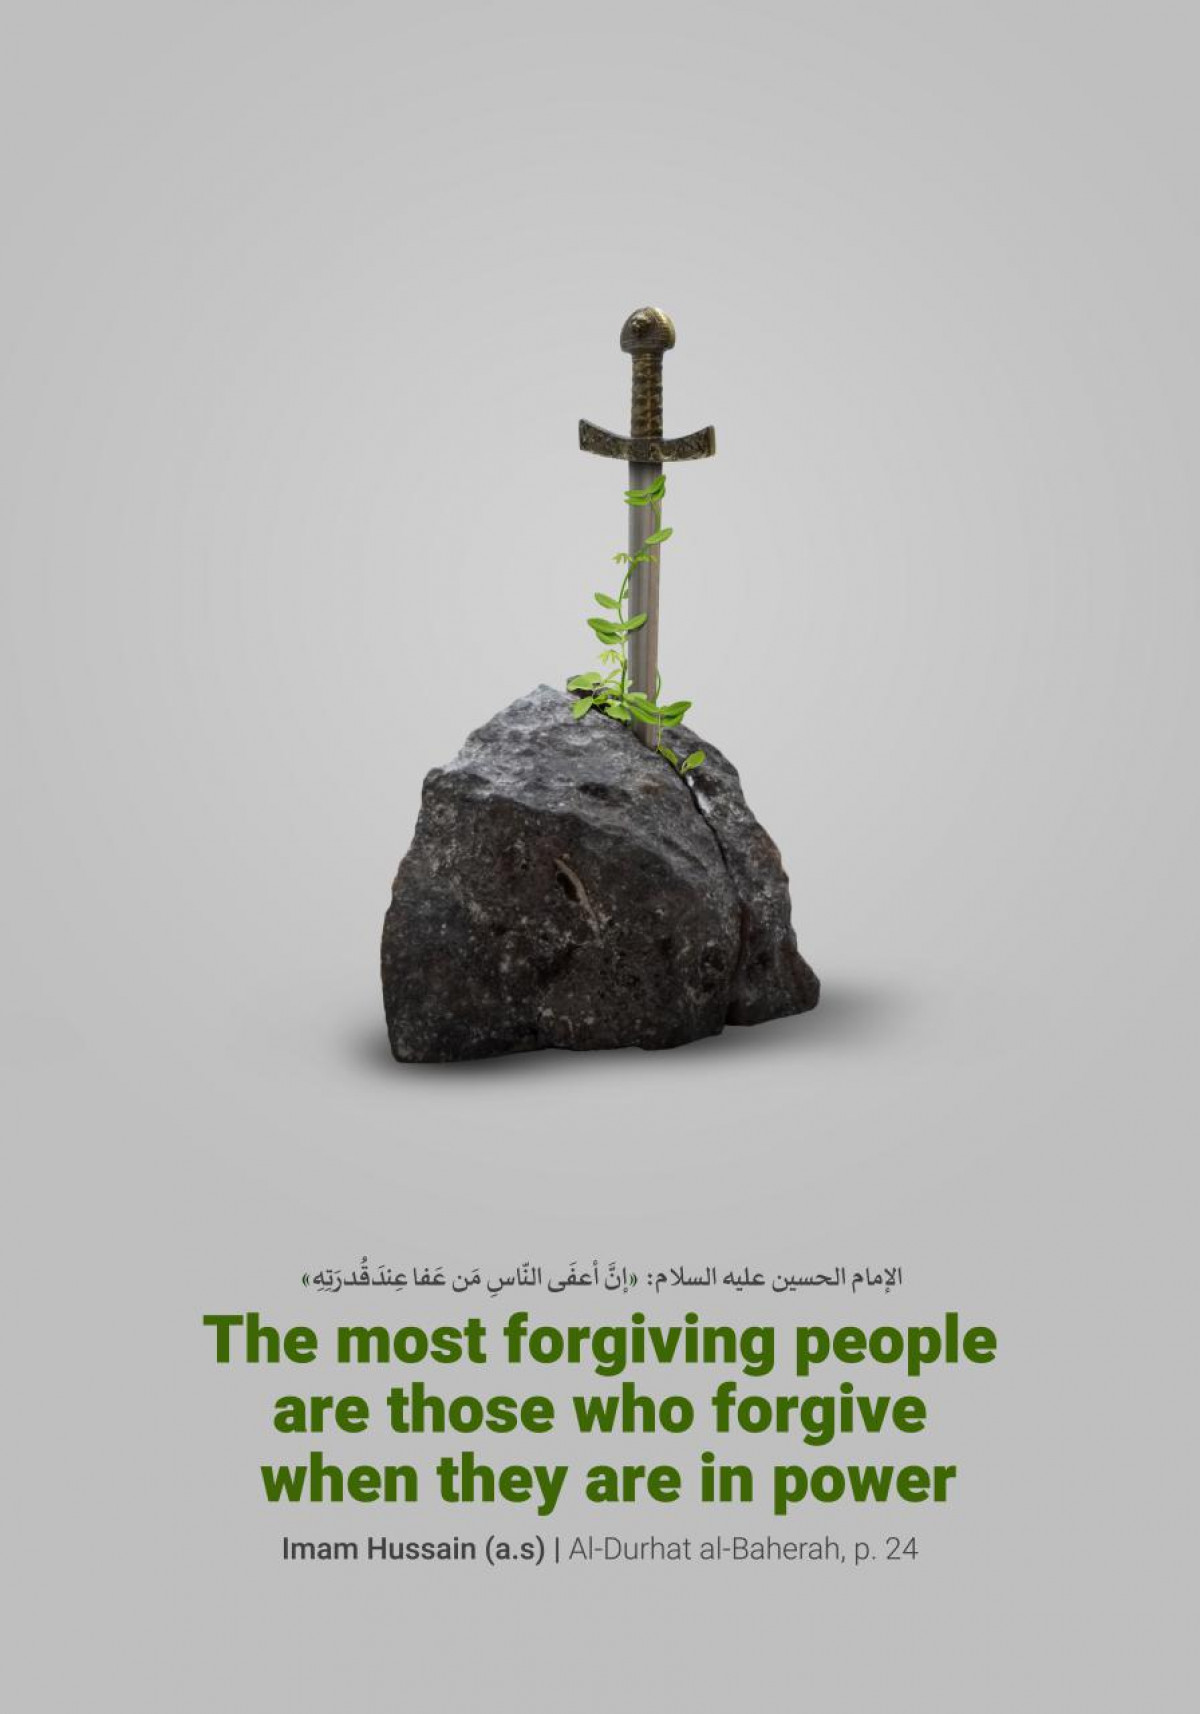 The most forgiving people are those who forgive when they are in power